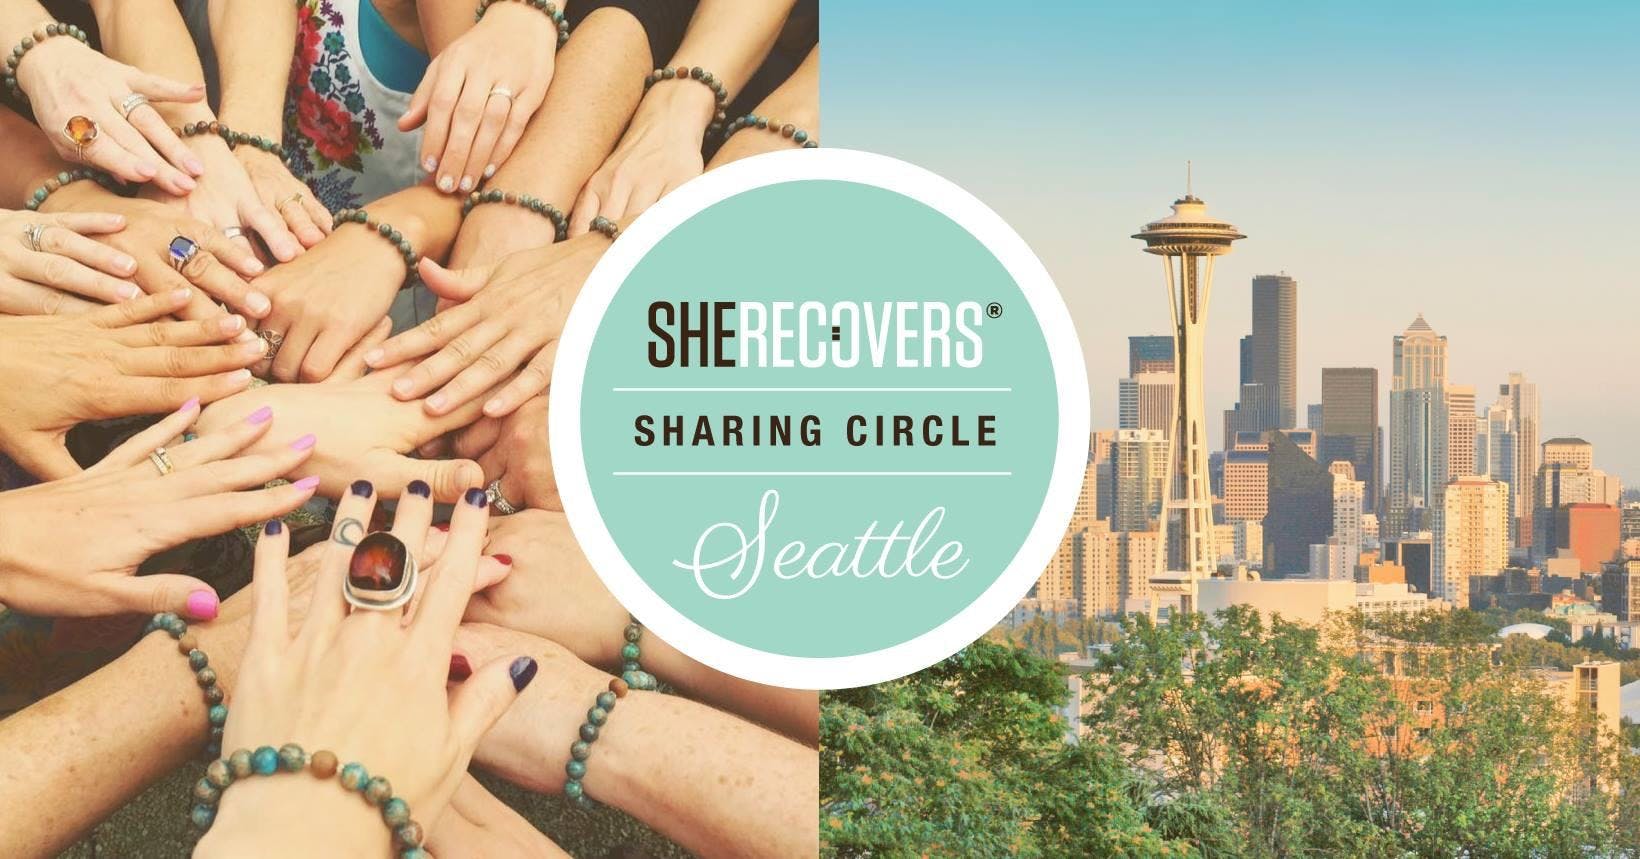 SHE RECOVERS Sharing Circle-Seattle